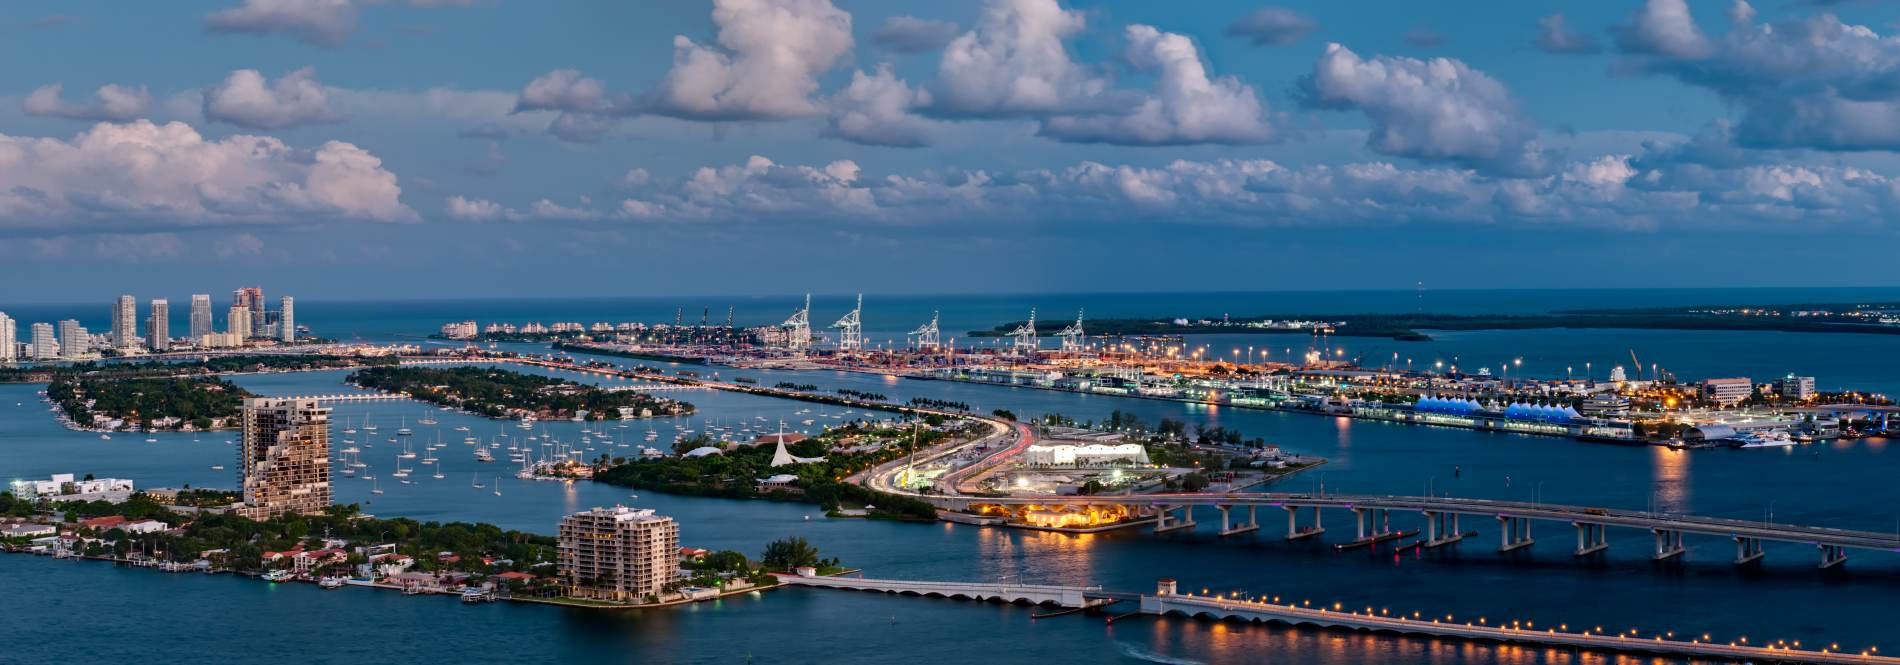 $5.50 Miami Port Parking, Lowest Cost Parking at Port of MIA